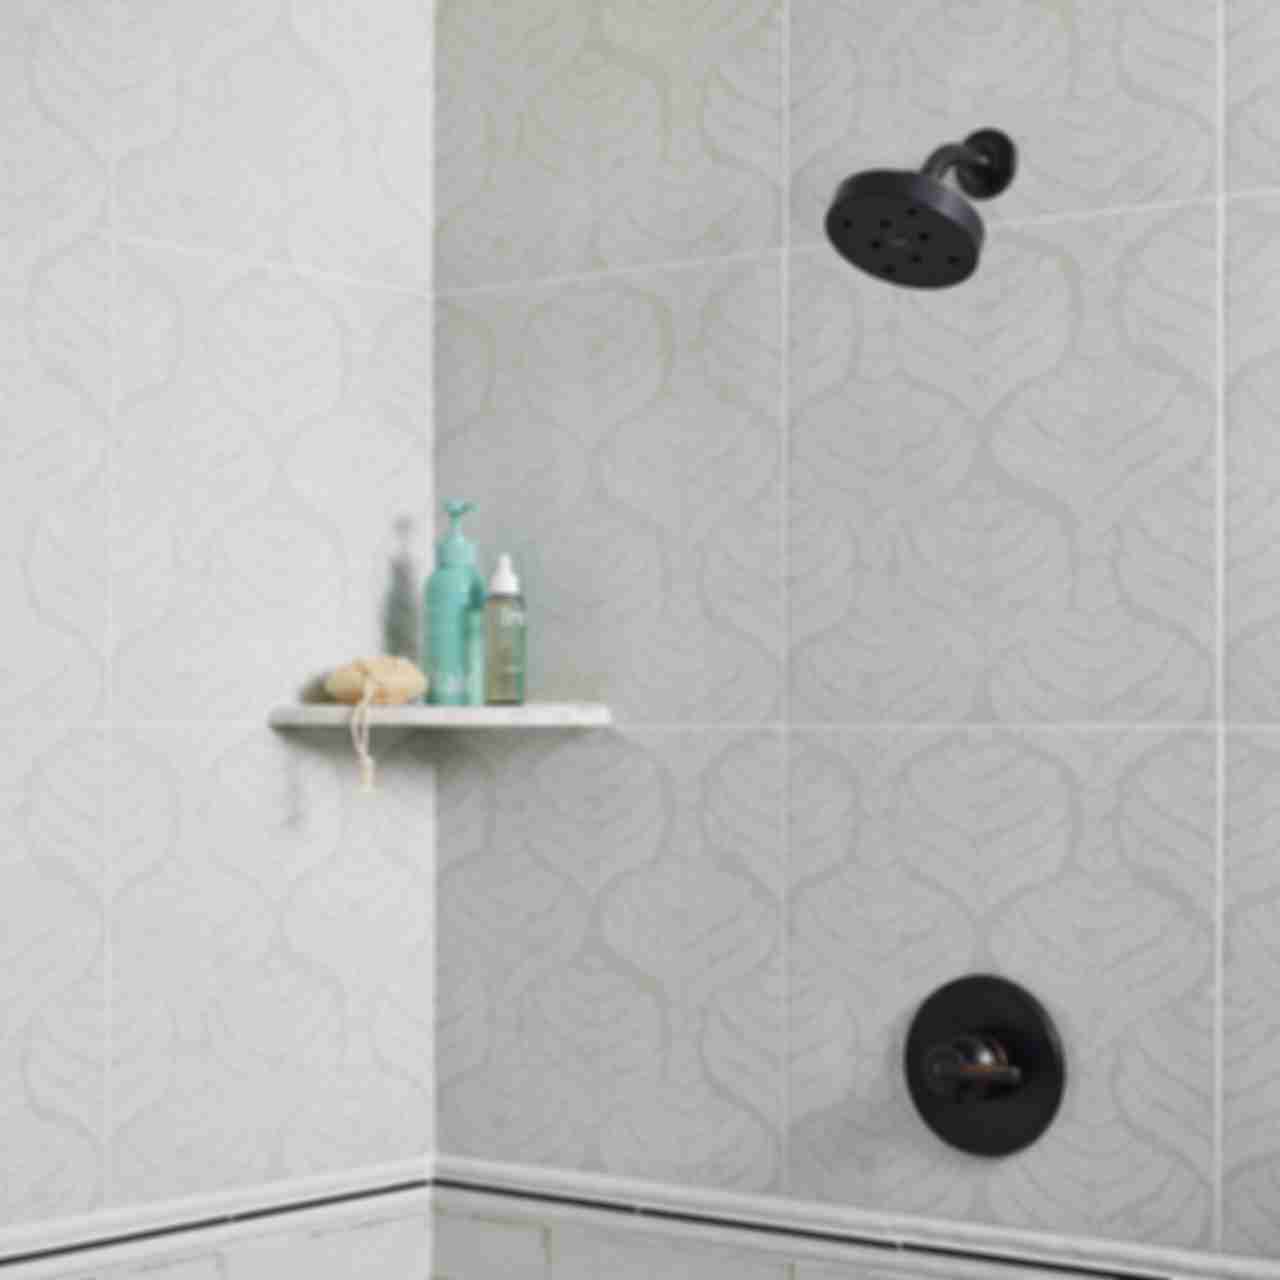 A bathroom shower design combines patterned tile on the upper shower walls, with subway tile on the lower shower walls. Trim pieces are layered to create an attractive transition between the two surface materials, and tie in the color of the shower fixtures. A small corner shelf on the upper portion of the wall adds functional storage.